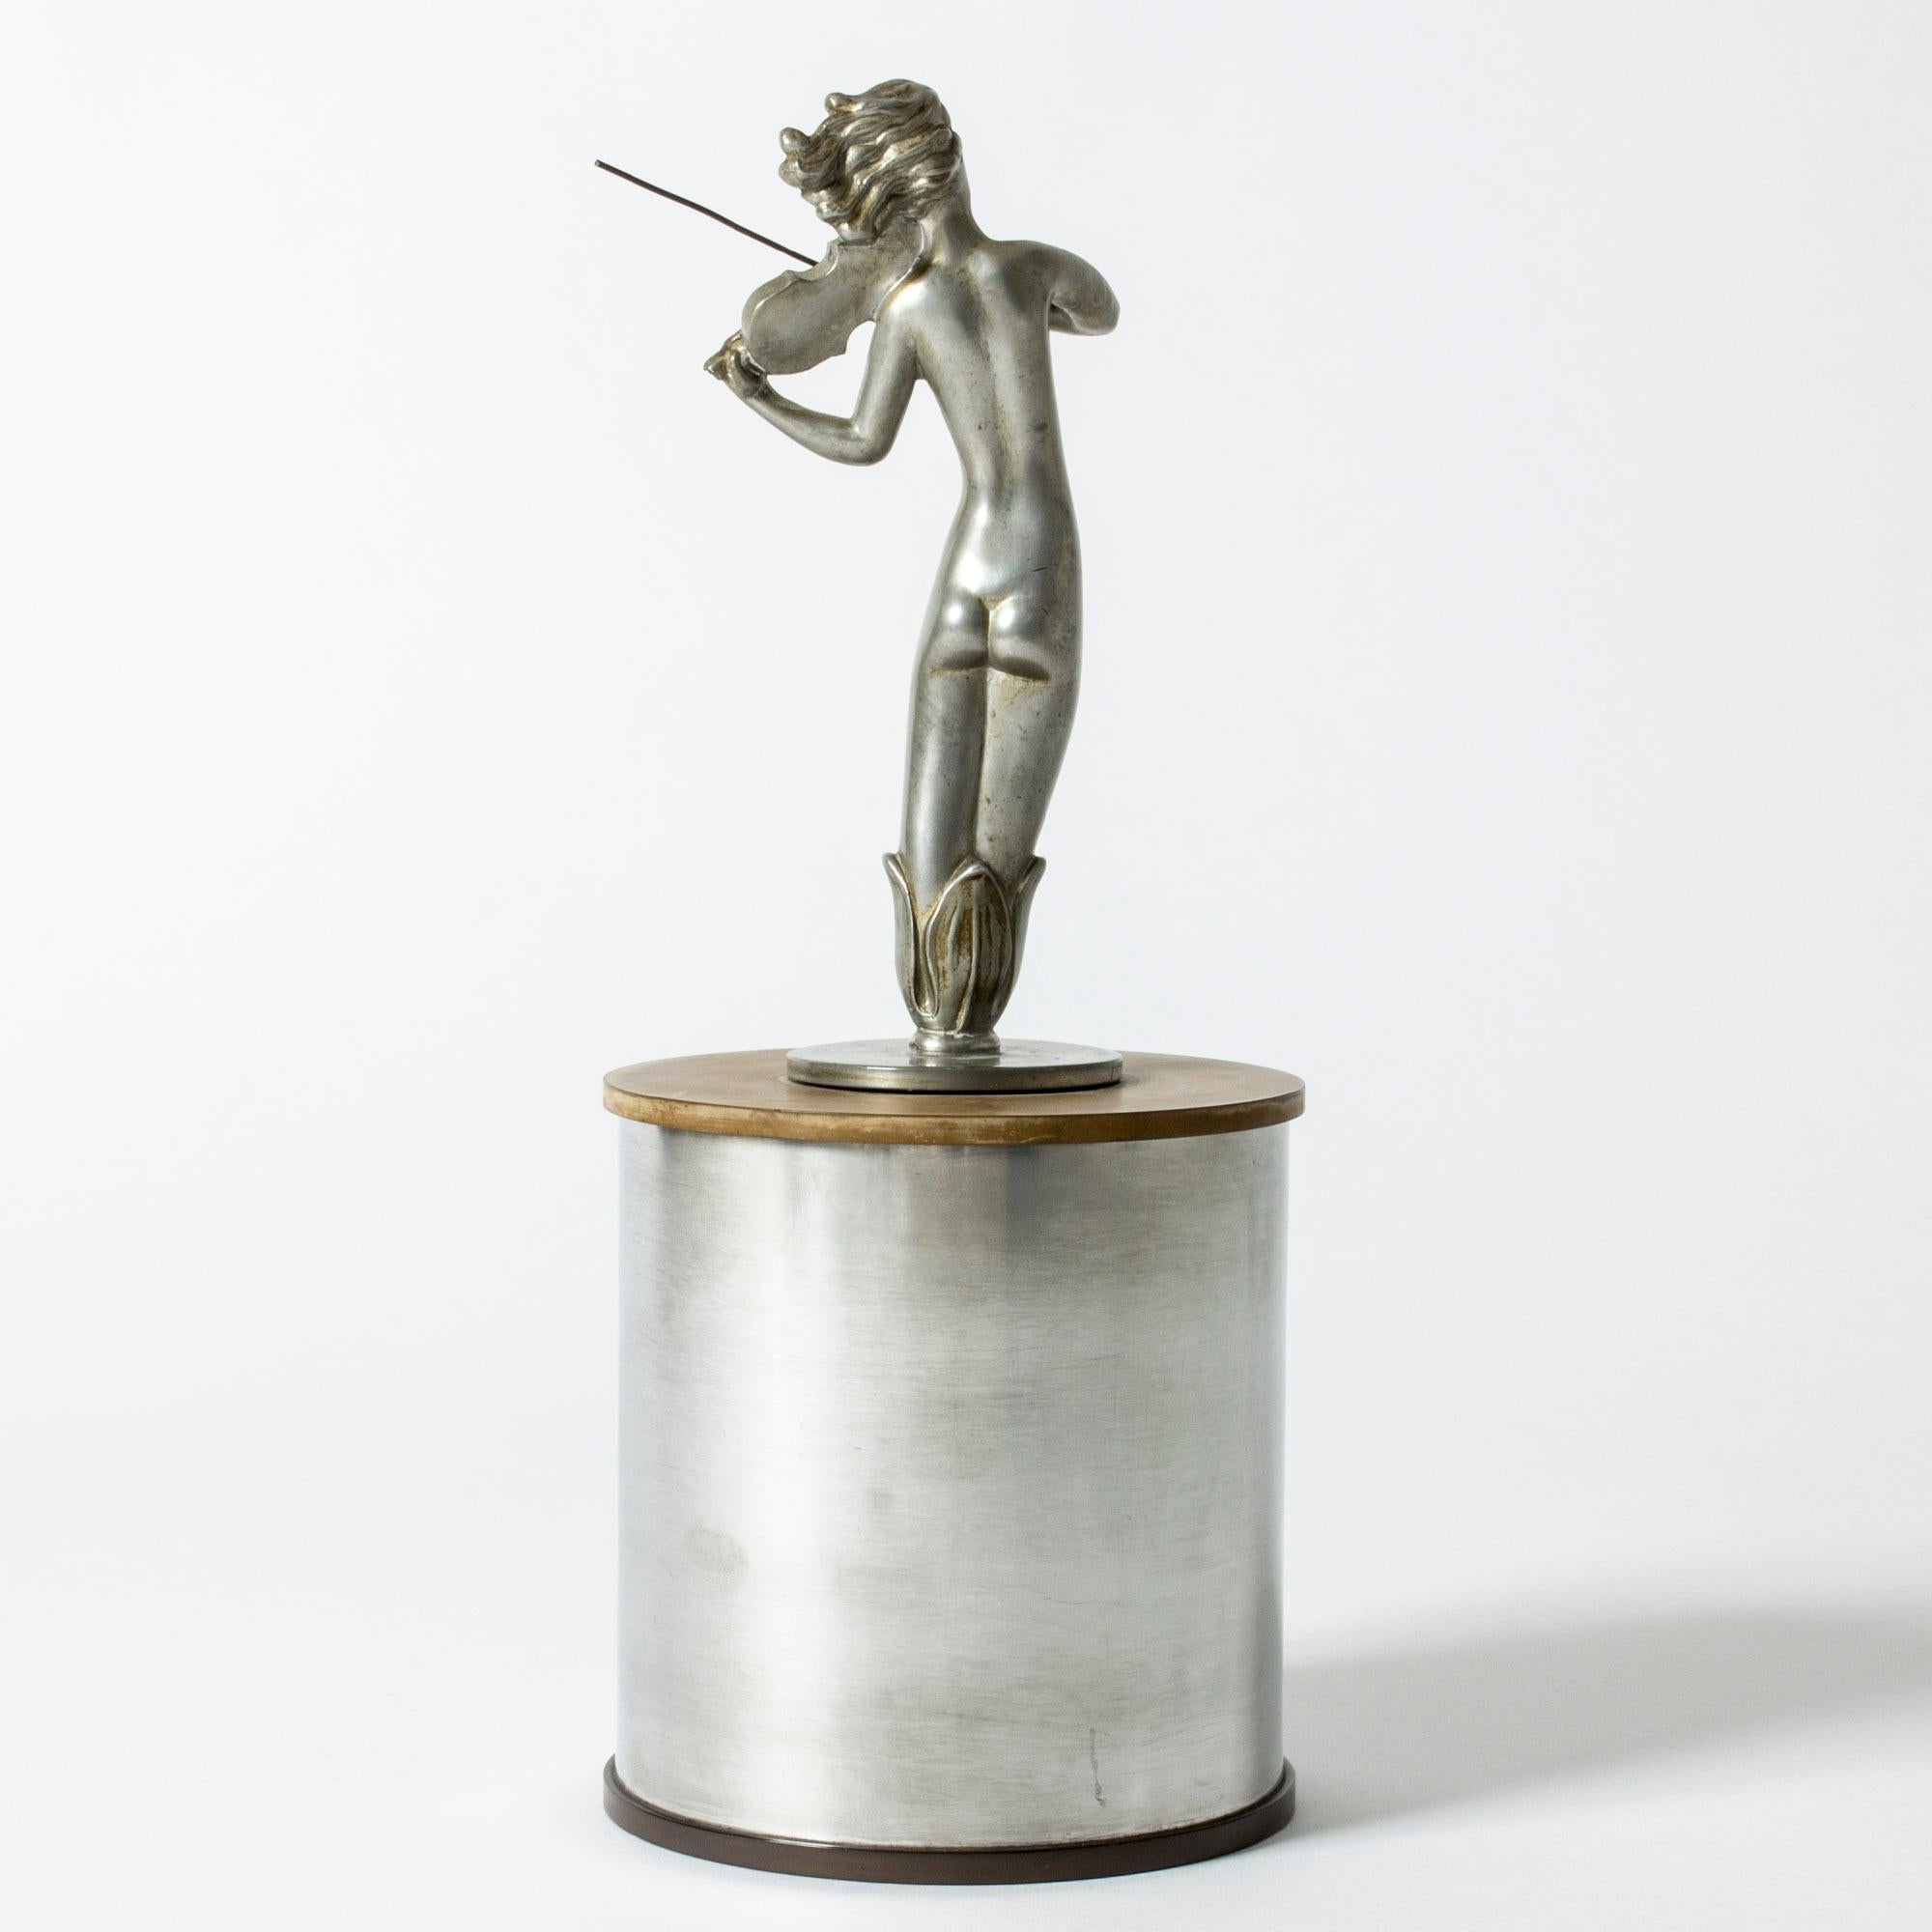 Striking pewter jar by Ivar Ålenius-Björk, with the lid adorned with a beautiful violin-playing woman. Bakelite lid and bottom. Lovely attention to detail, like the woman’s wind-blown hair.